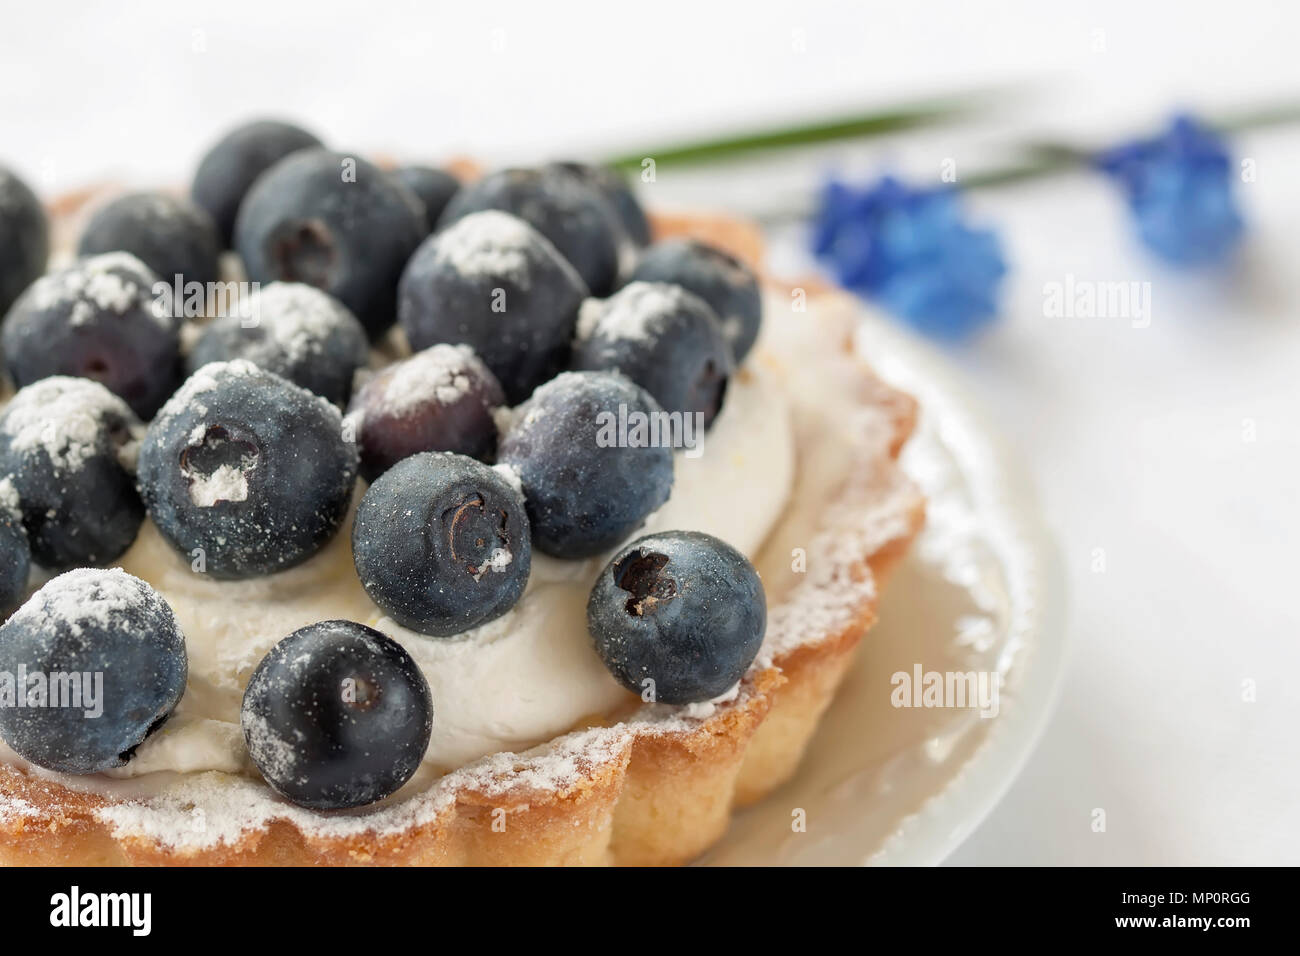 Fresh blueberry tart with cream in portion plate close-up. Delicious summer berry dessert. Stock Photo